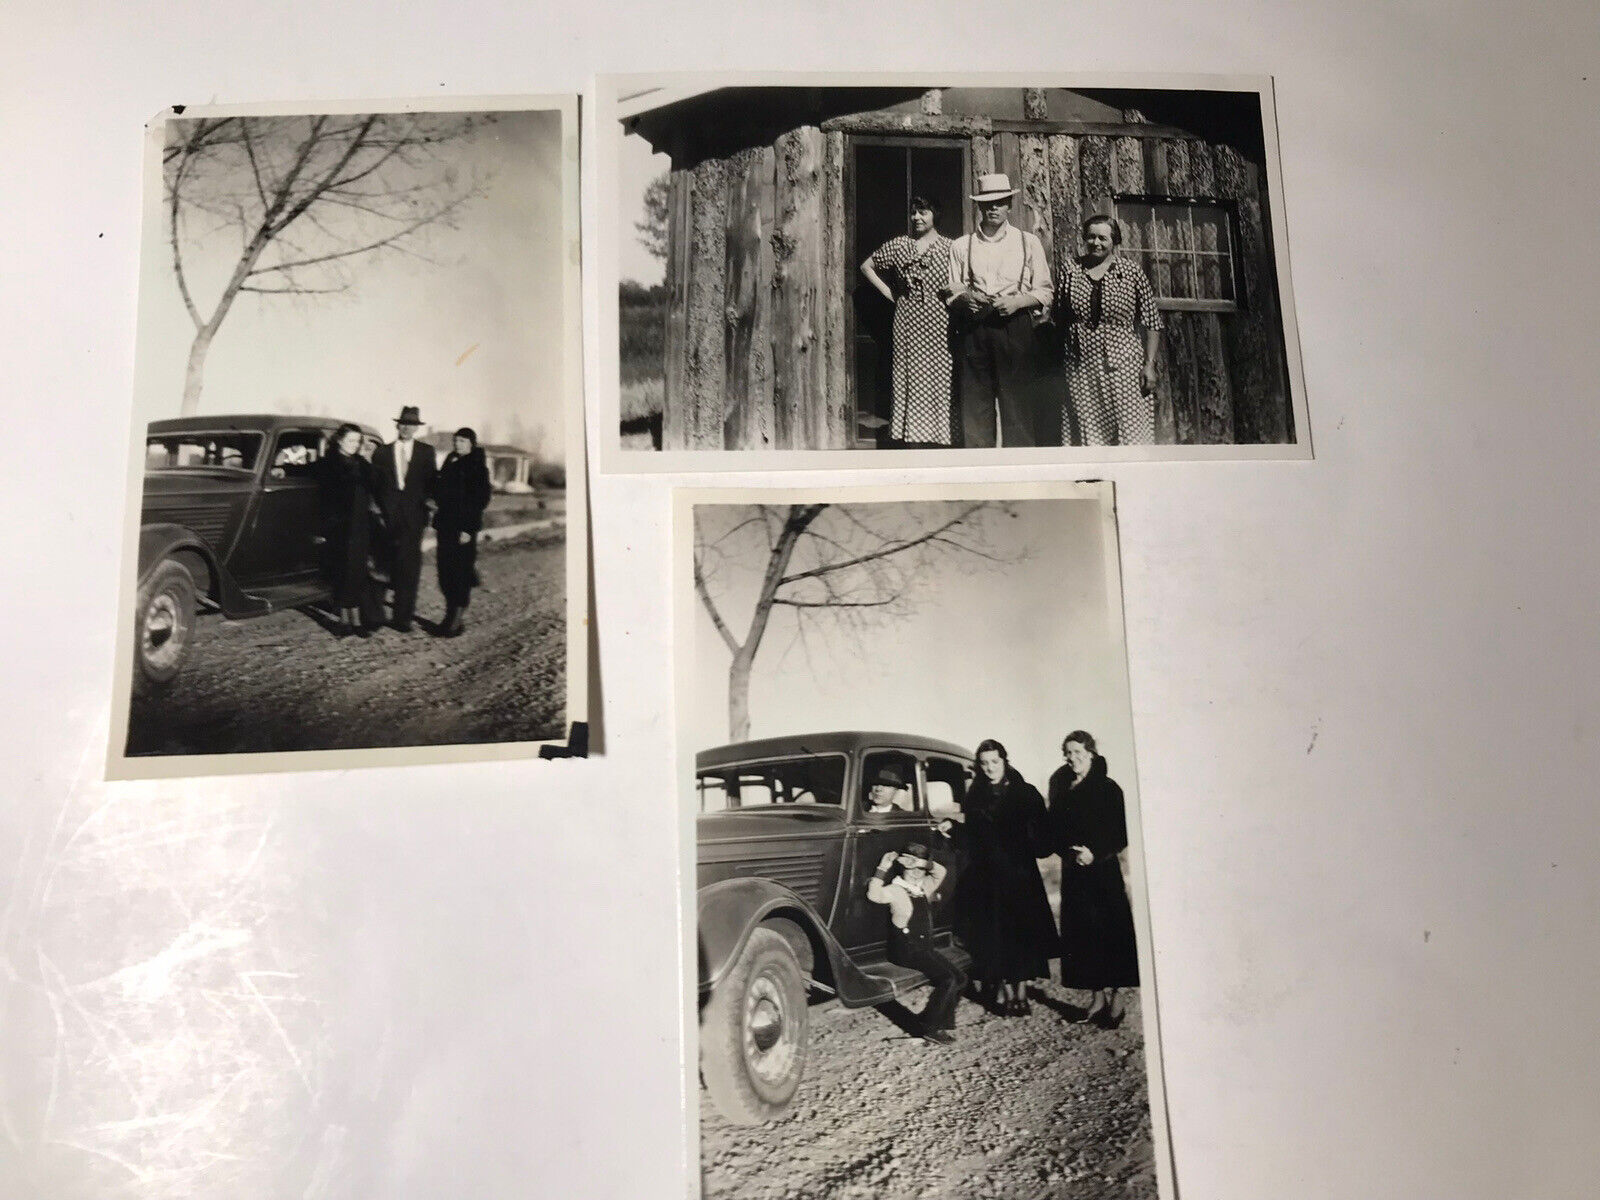 Vintage 1930s Photos Of People And Old Cars Lot Of 3 Black And White Photos